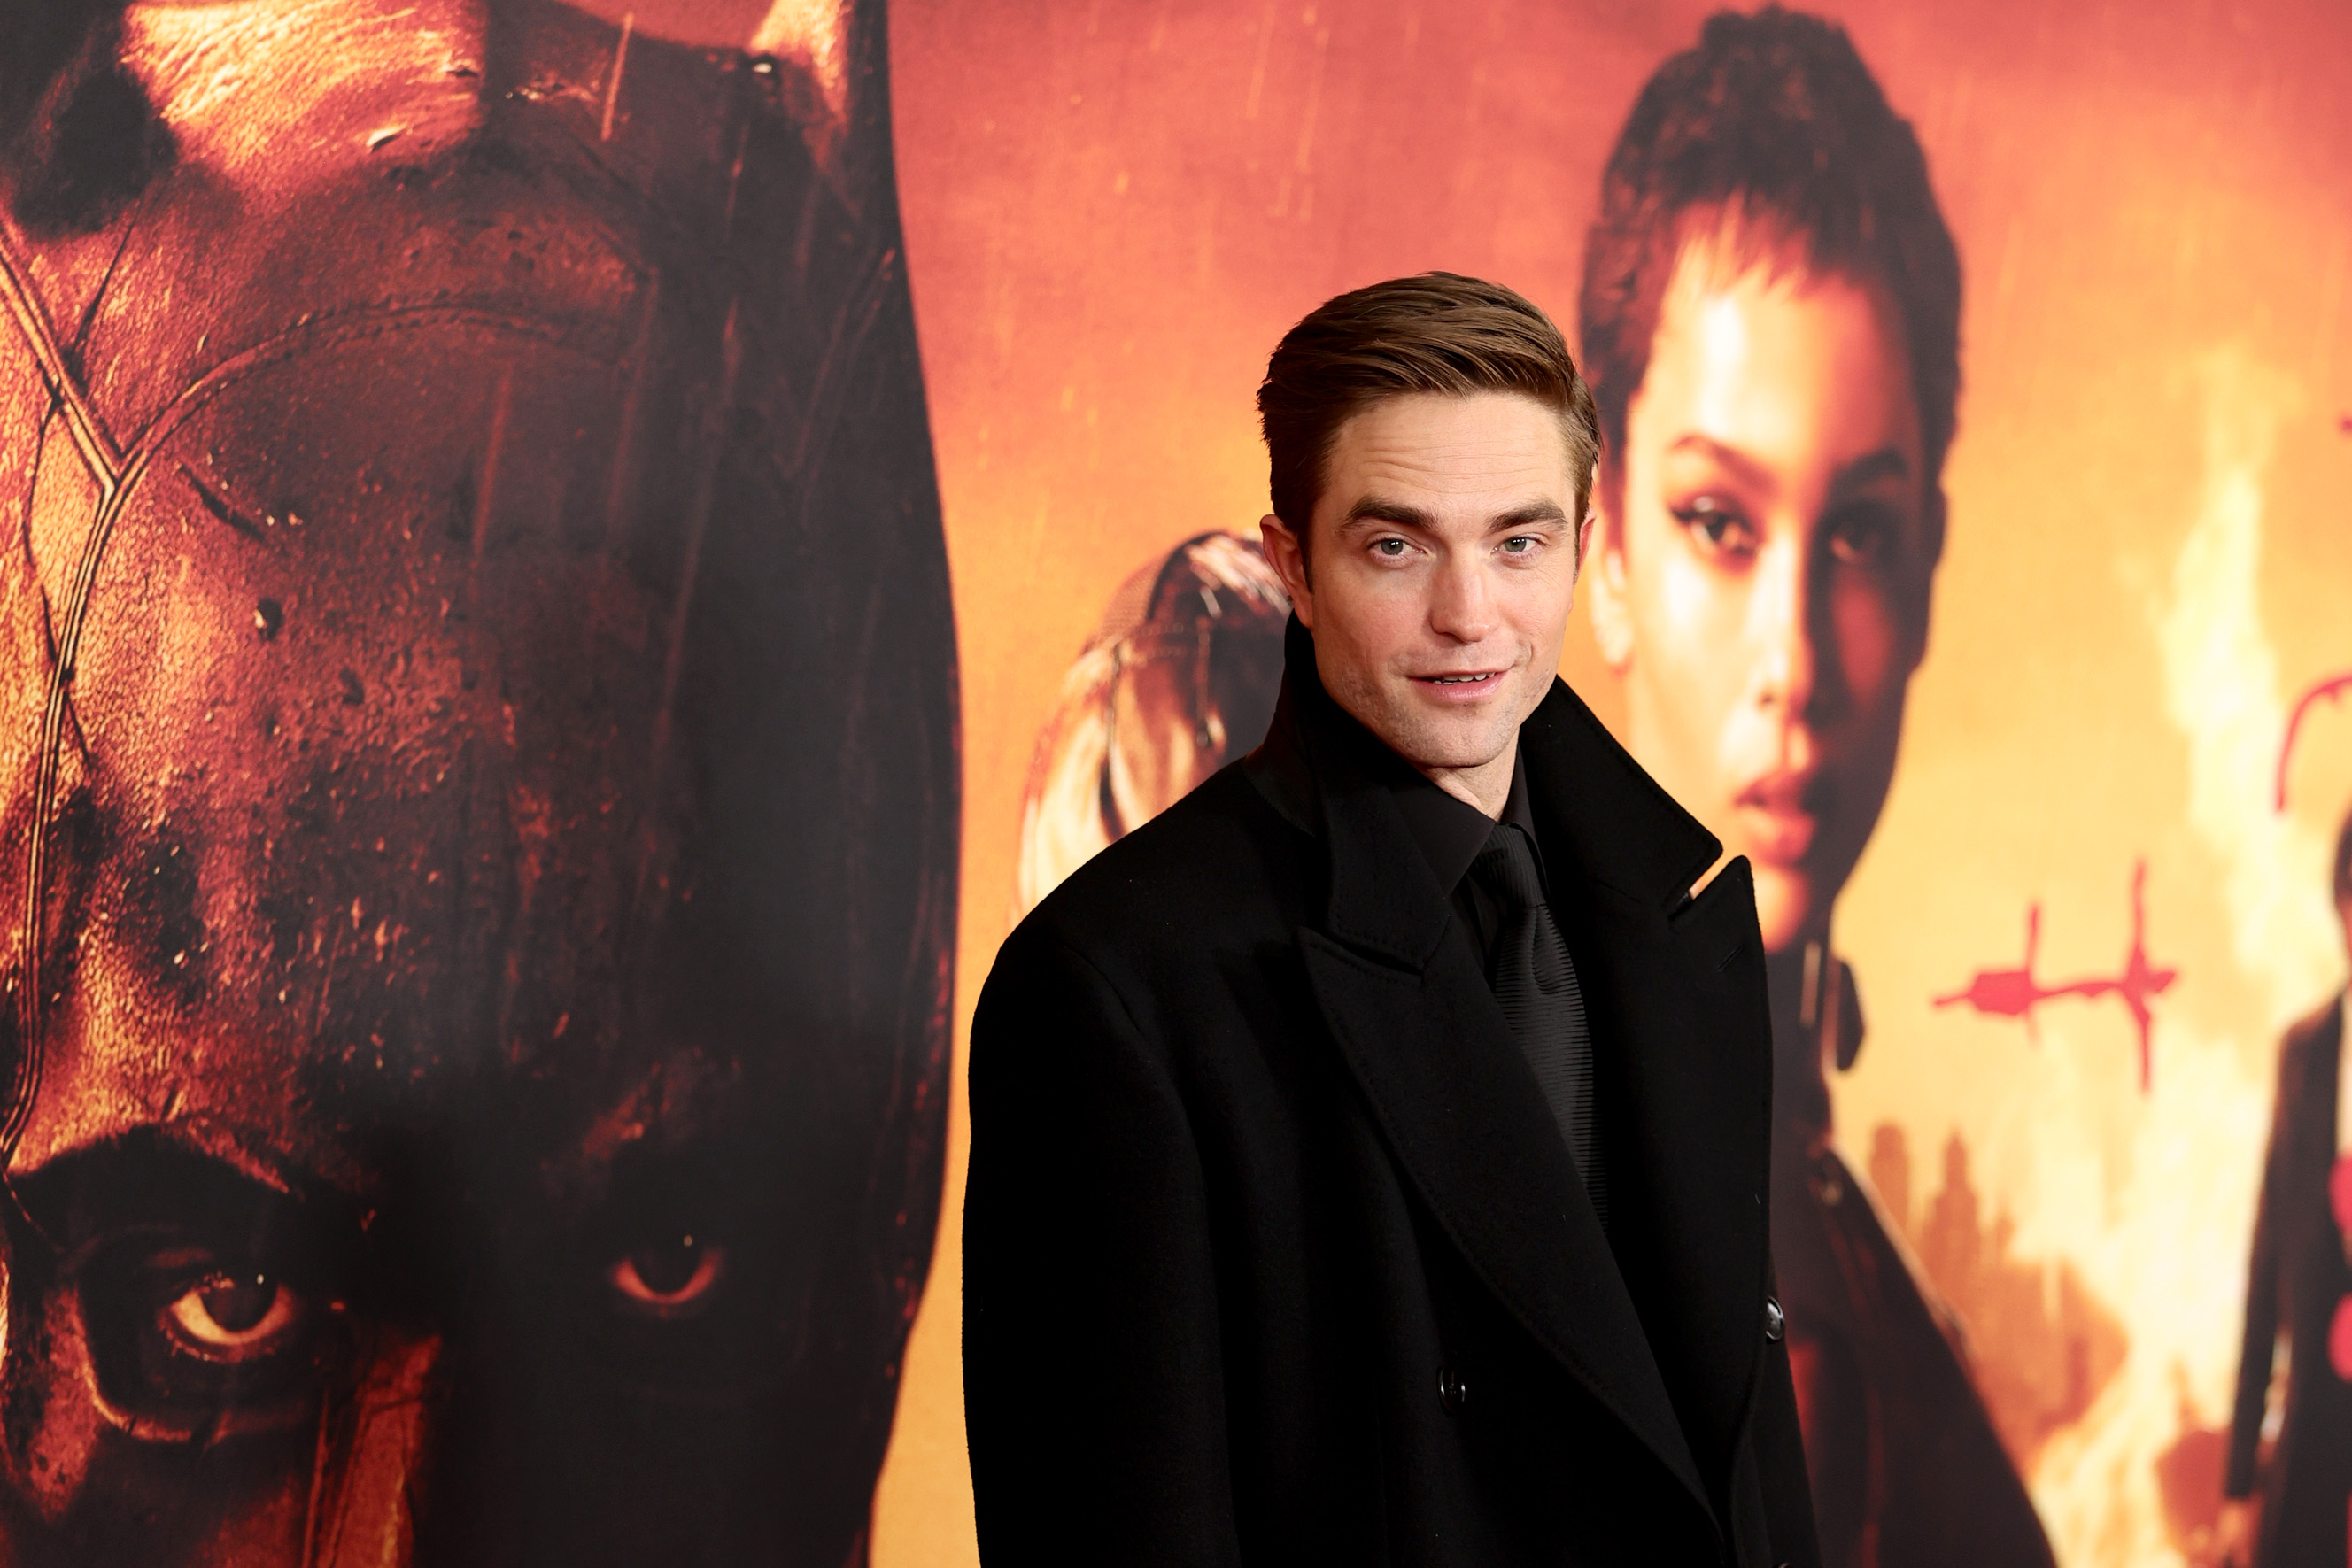 'Twilight' and 'The Batman' star Robert Pattinson. He's wearing a black coat and standing in front of an image for 'The Batman.'